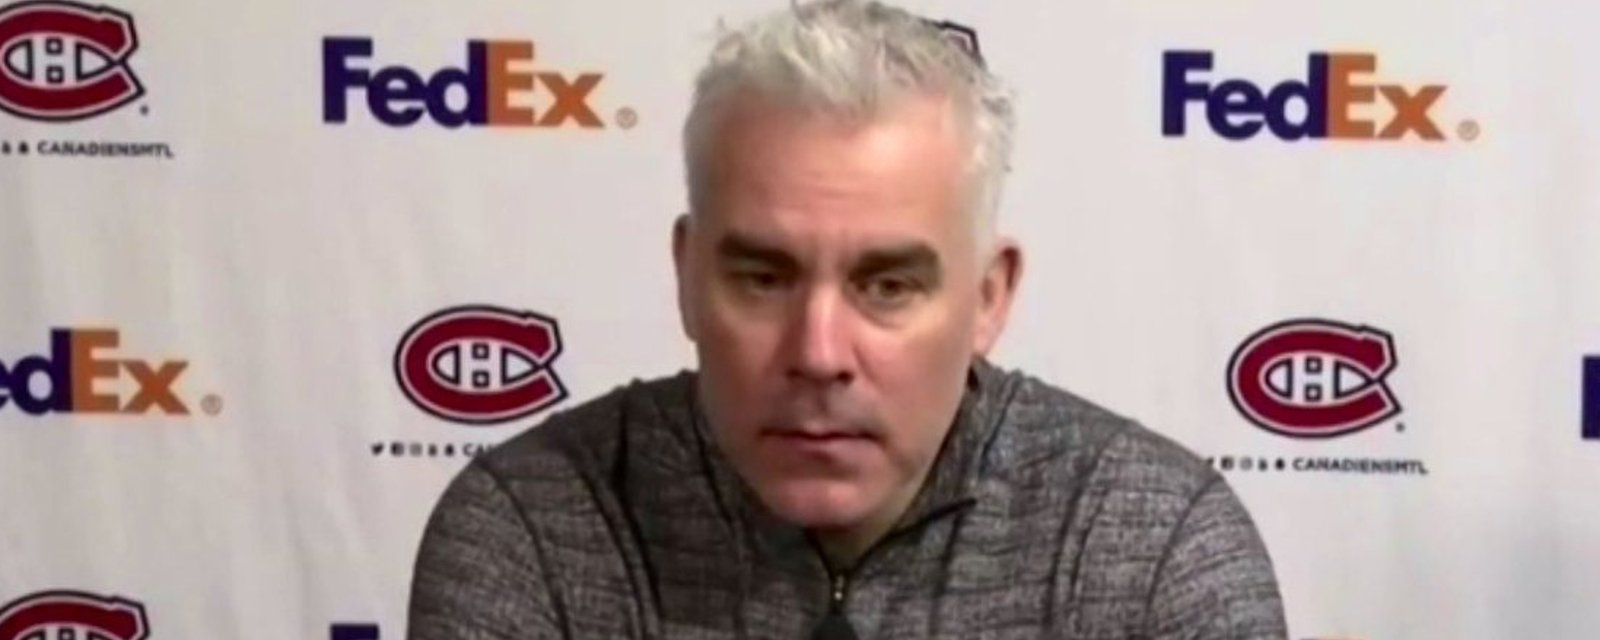 Habs’ Ducharme doesn't mince words, tells out loud what everyone’s been thinking! 